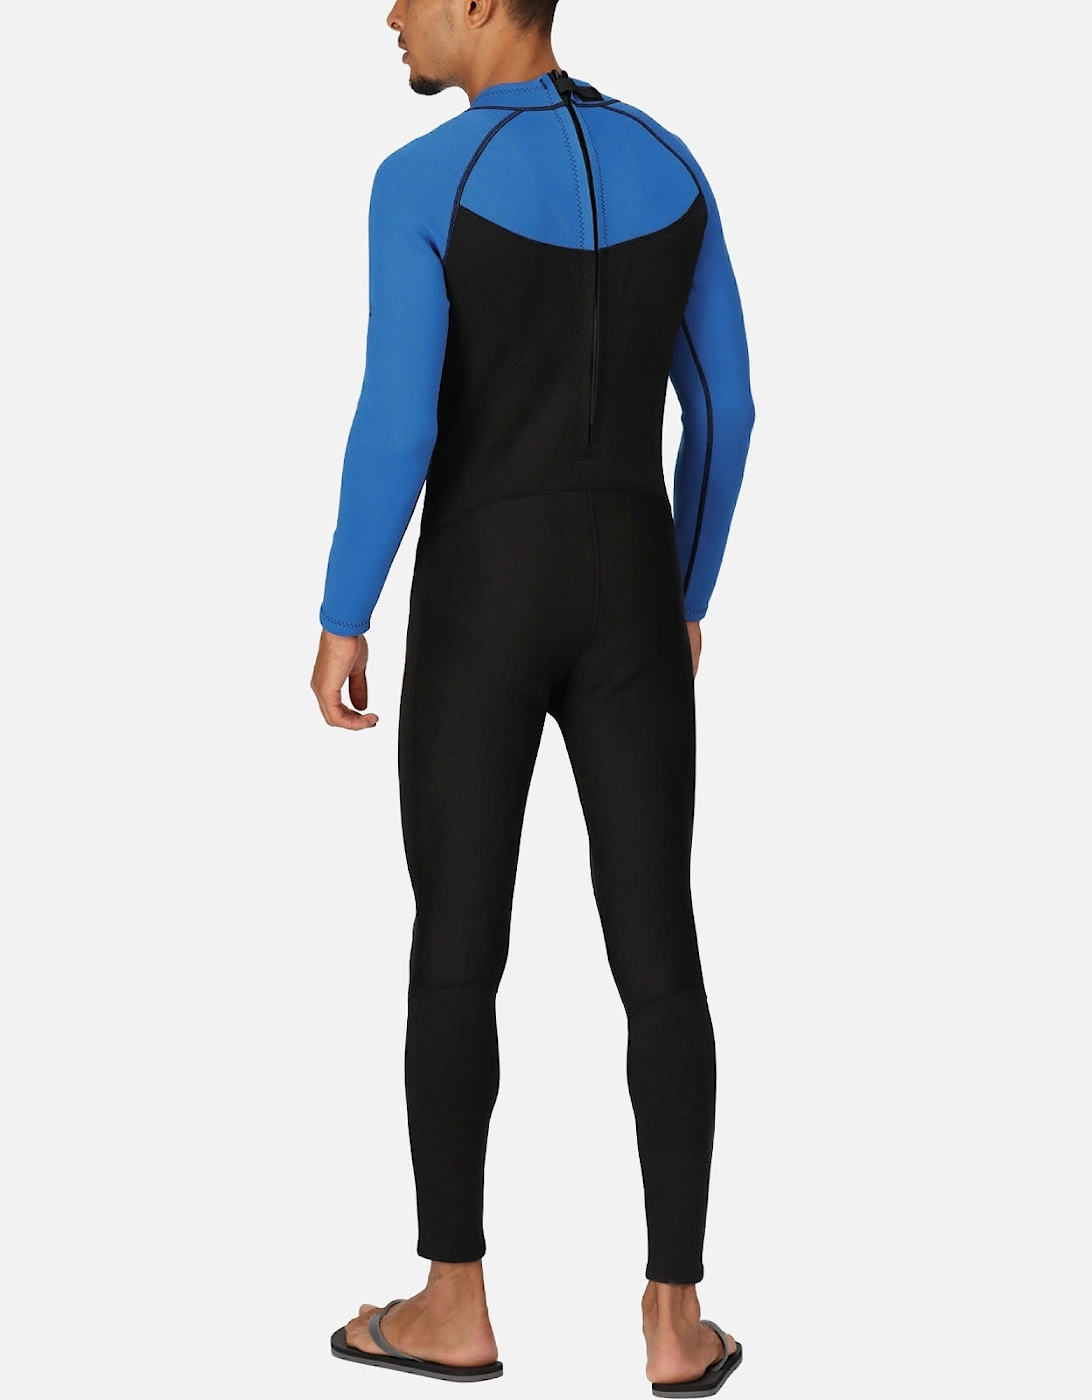 Mens Lightweight Quick Drying Full Wetsuit